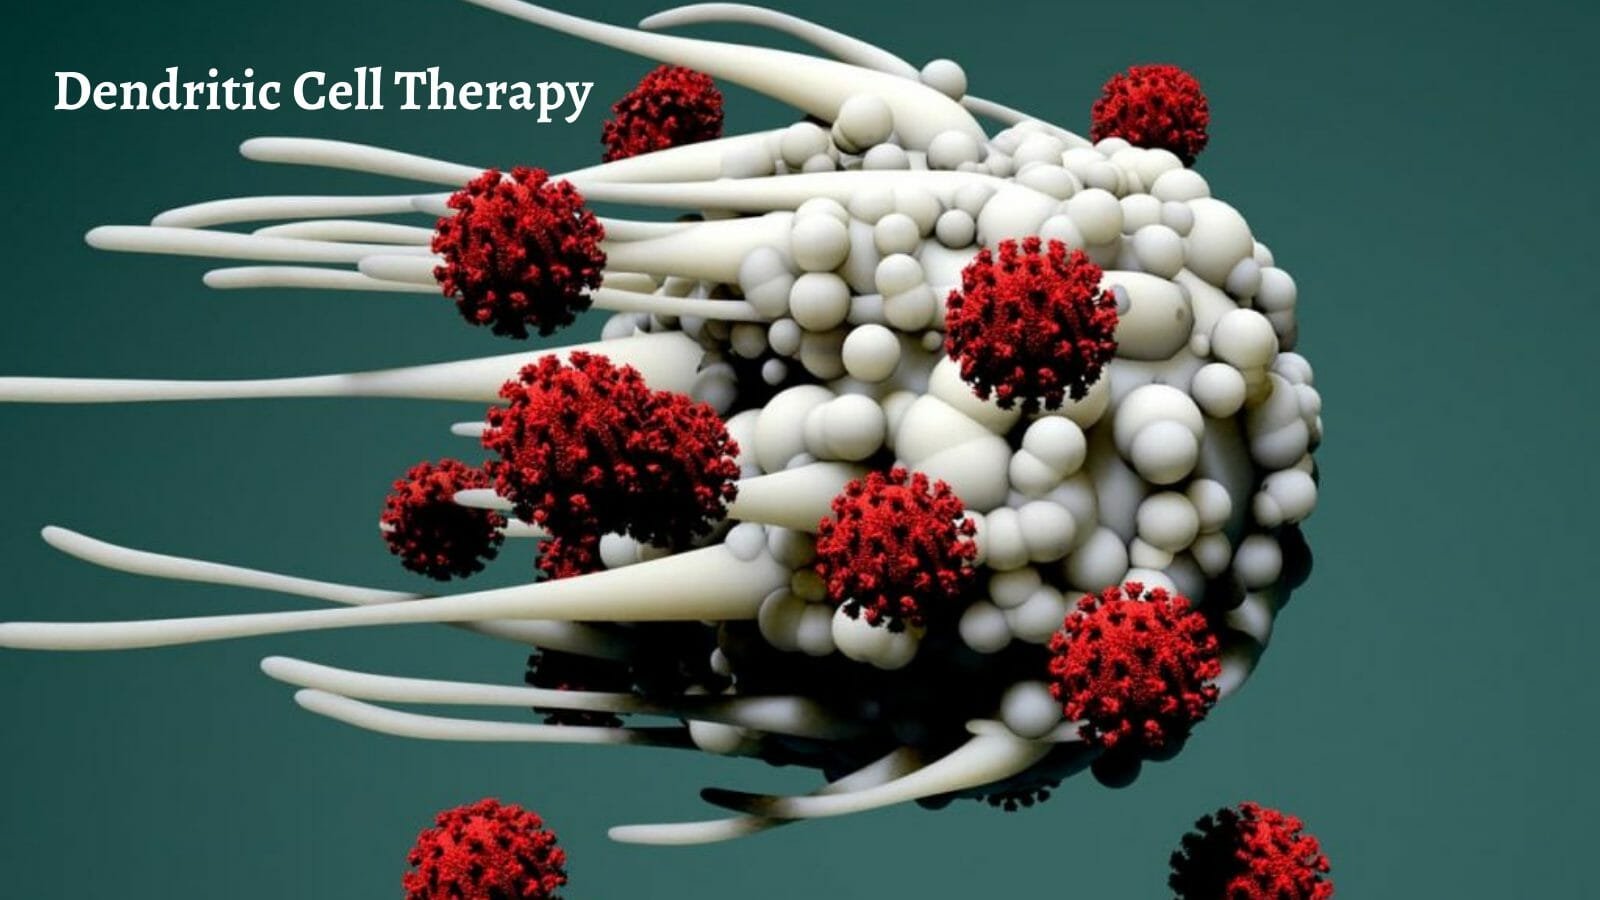 Who Is The Right Candidate For Dendritic Cell Therapy